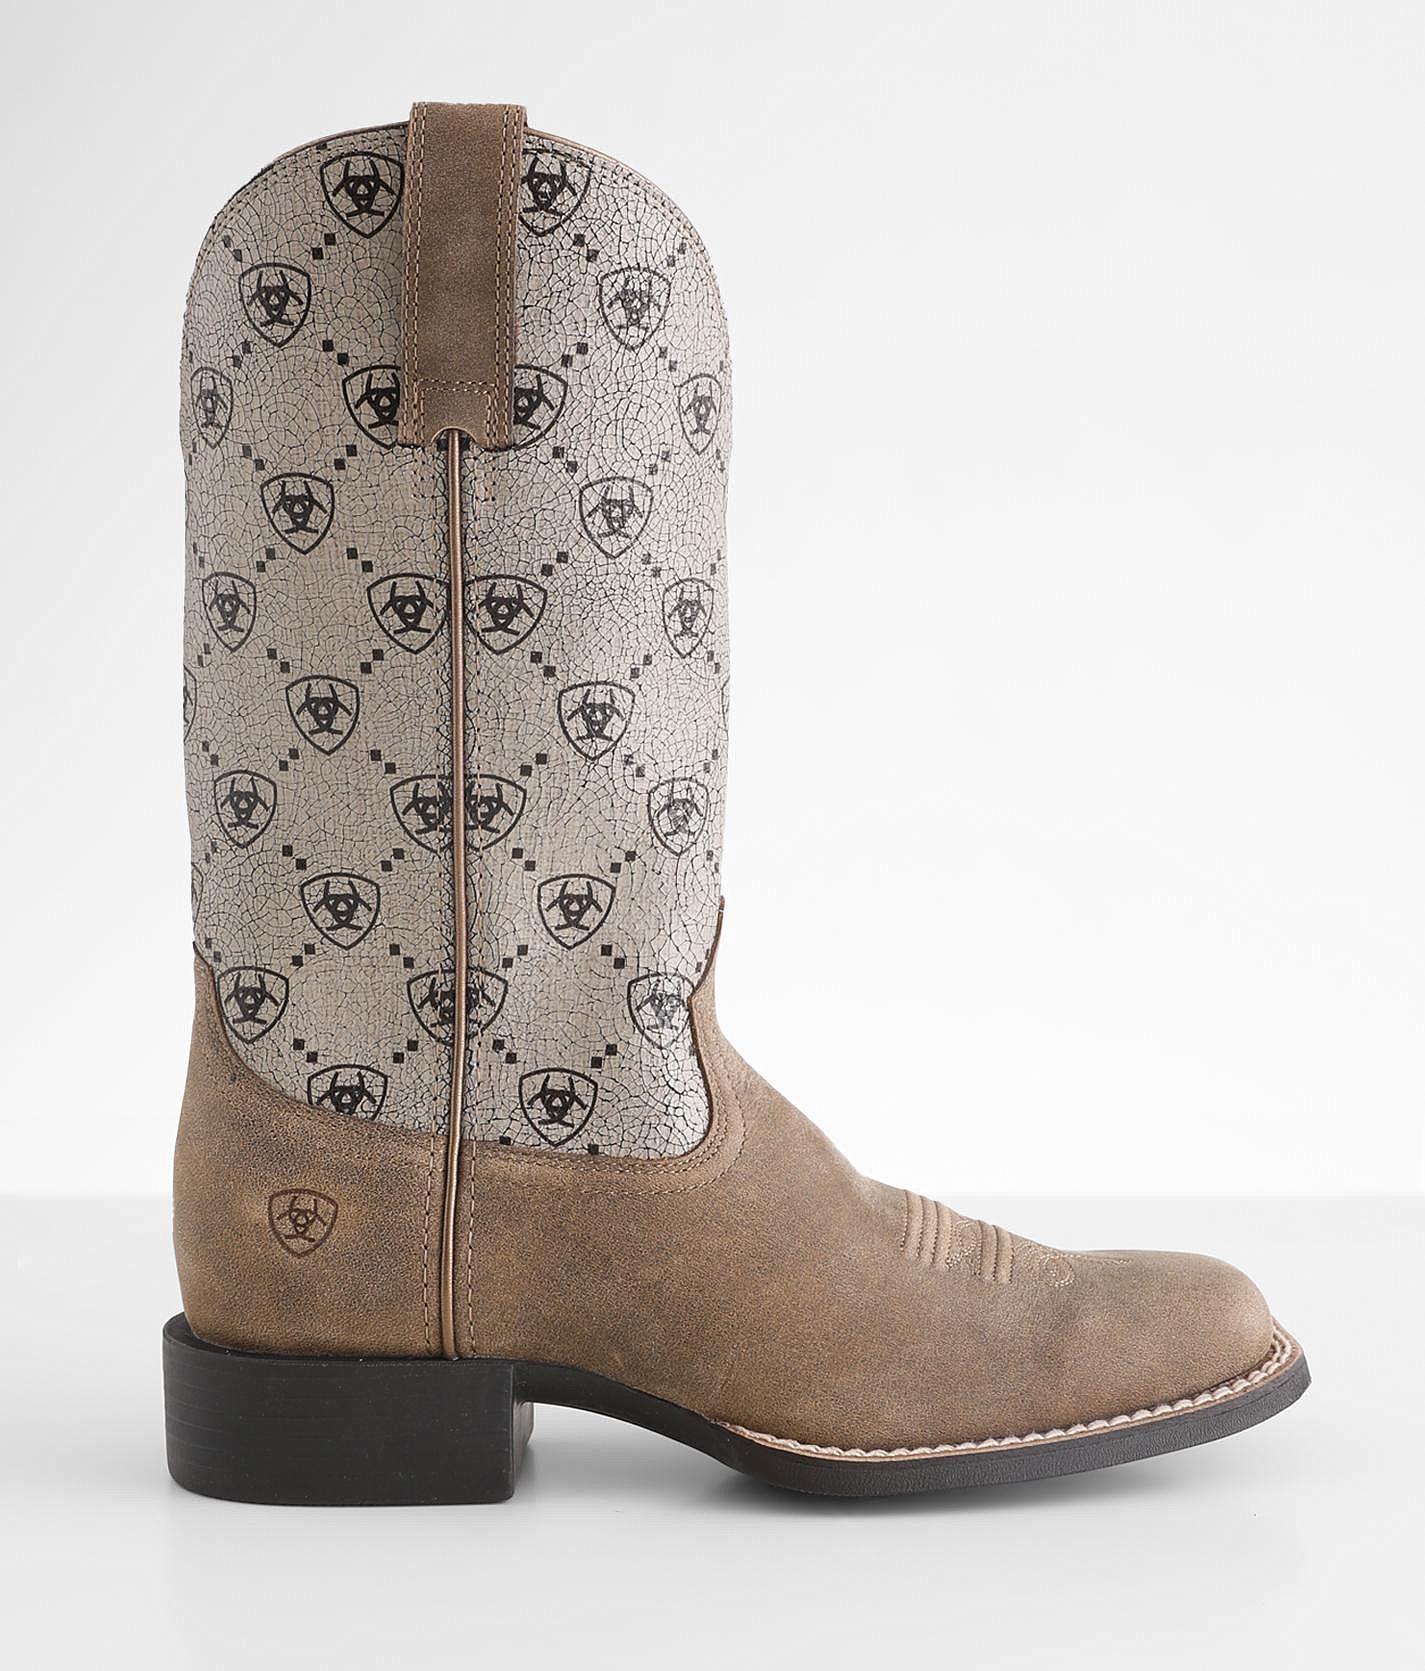 Ariat Round Up Leather Western Boot - Women's Shoes in Brown 